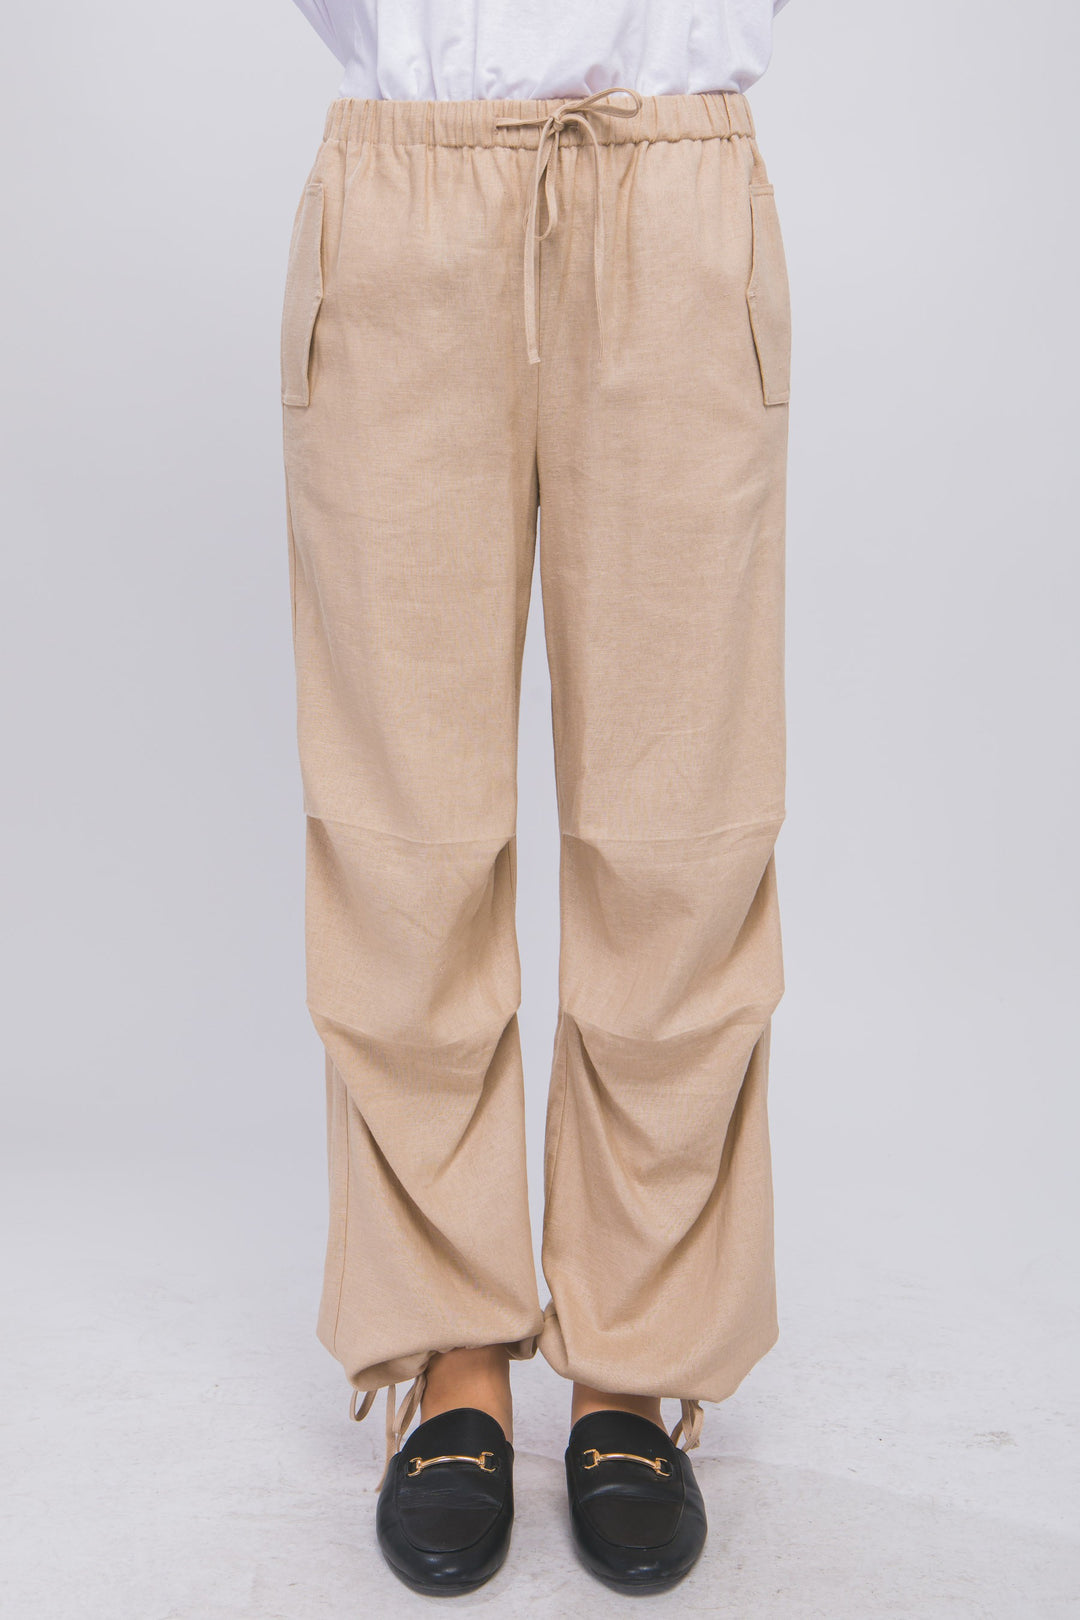 Lori Linen Drawstring Pants-Bottoms and Jeans-Anatomy Clothing Boutique in Brenham, Texas